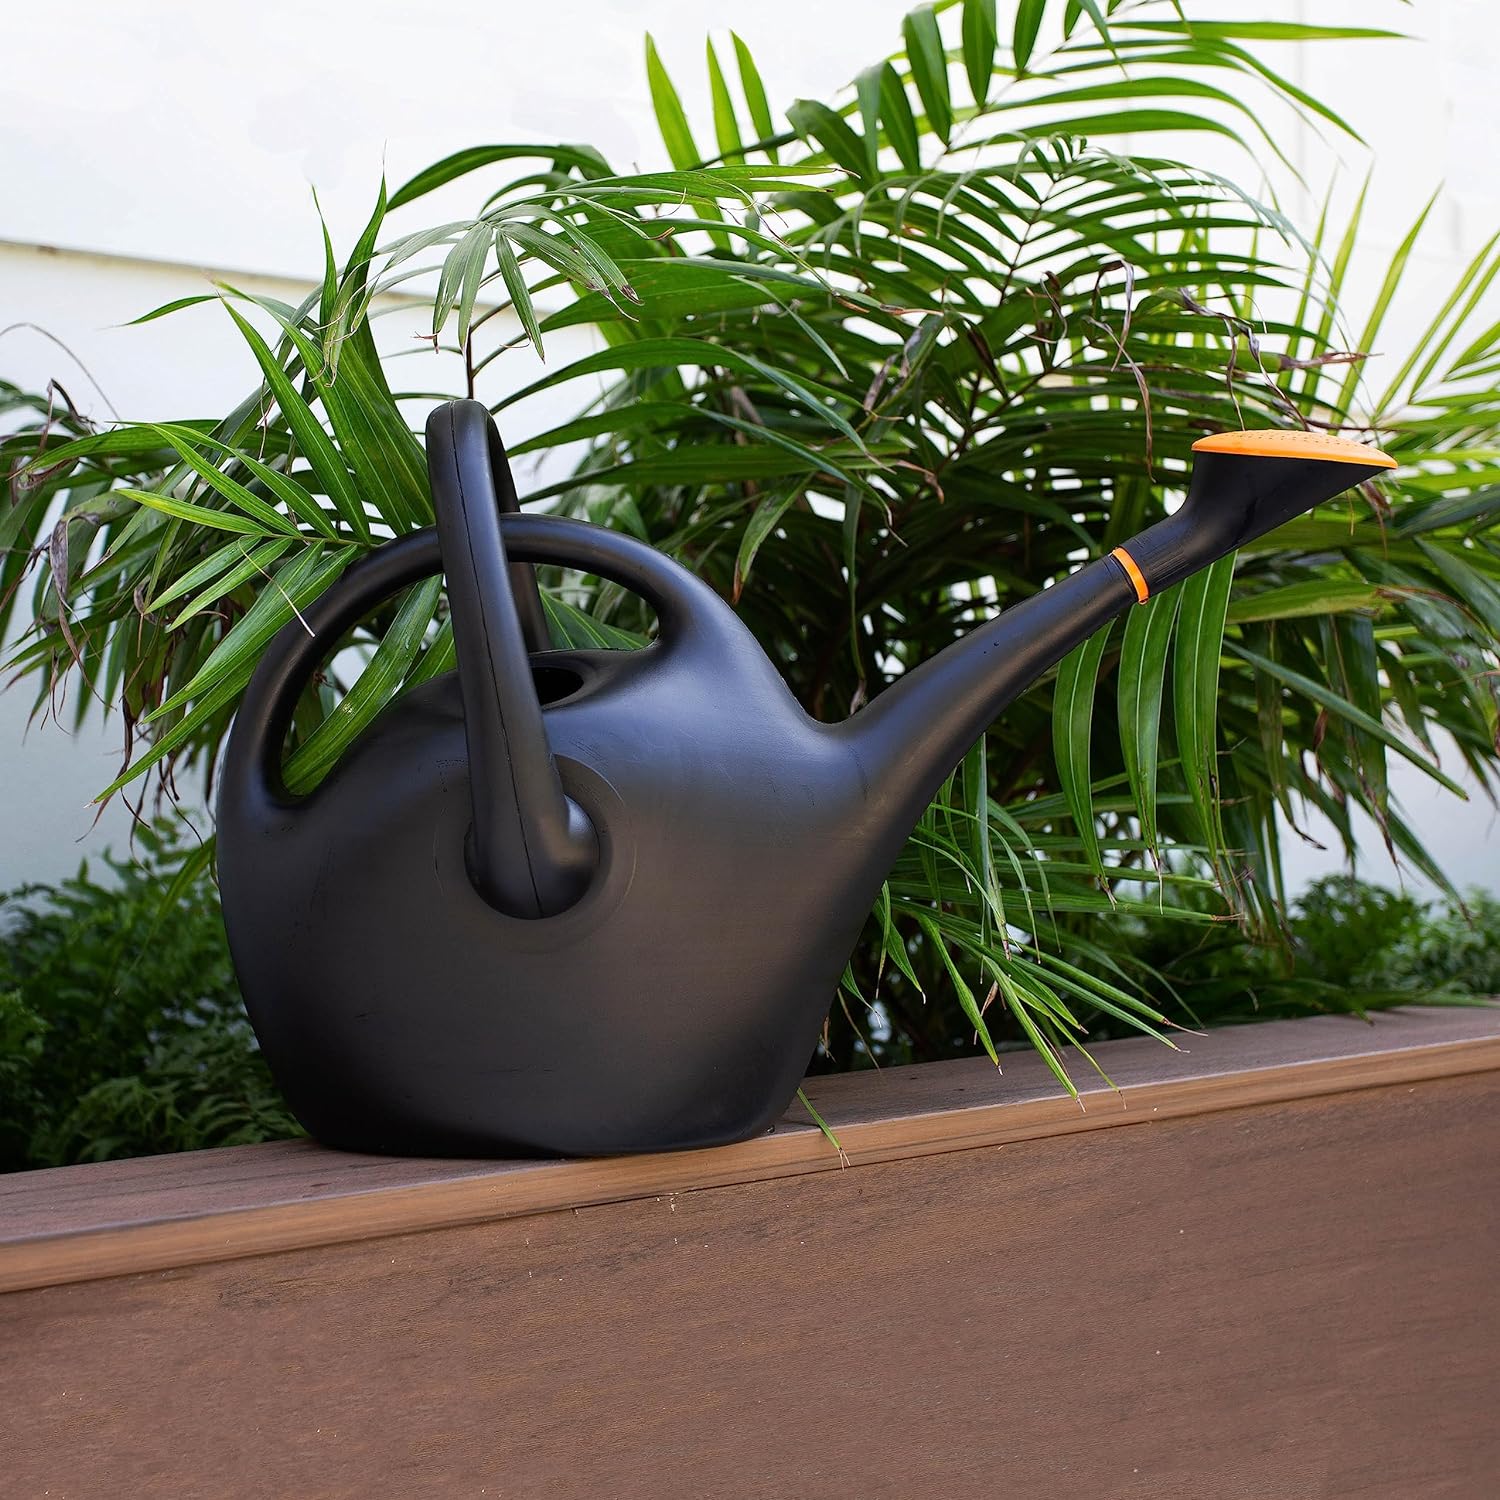 The Bloem Easy Pour Watering Can